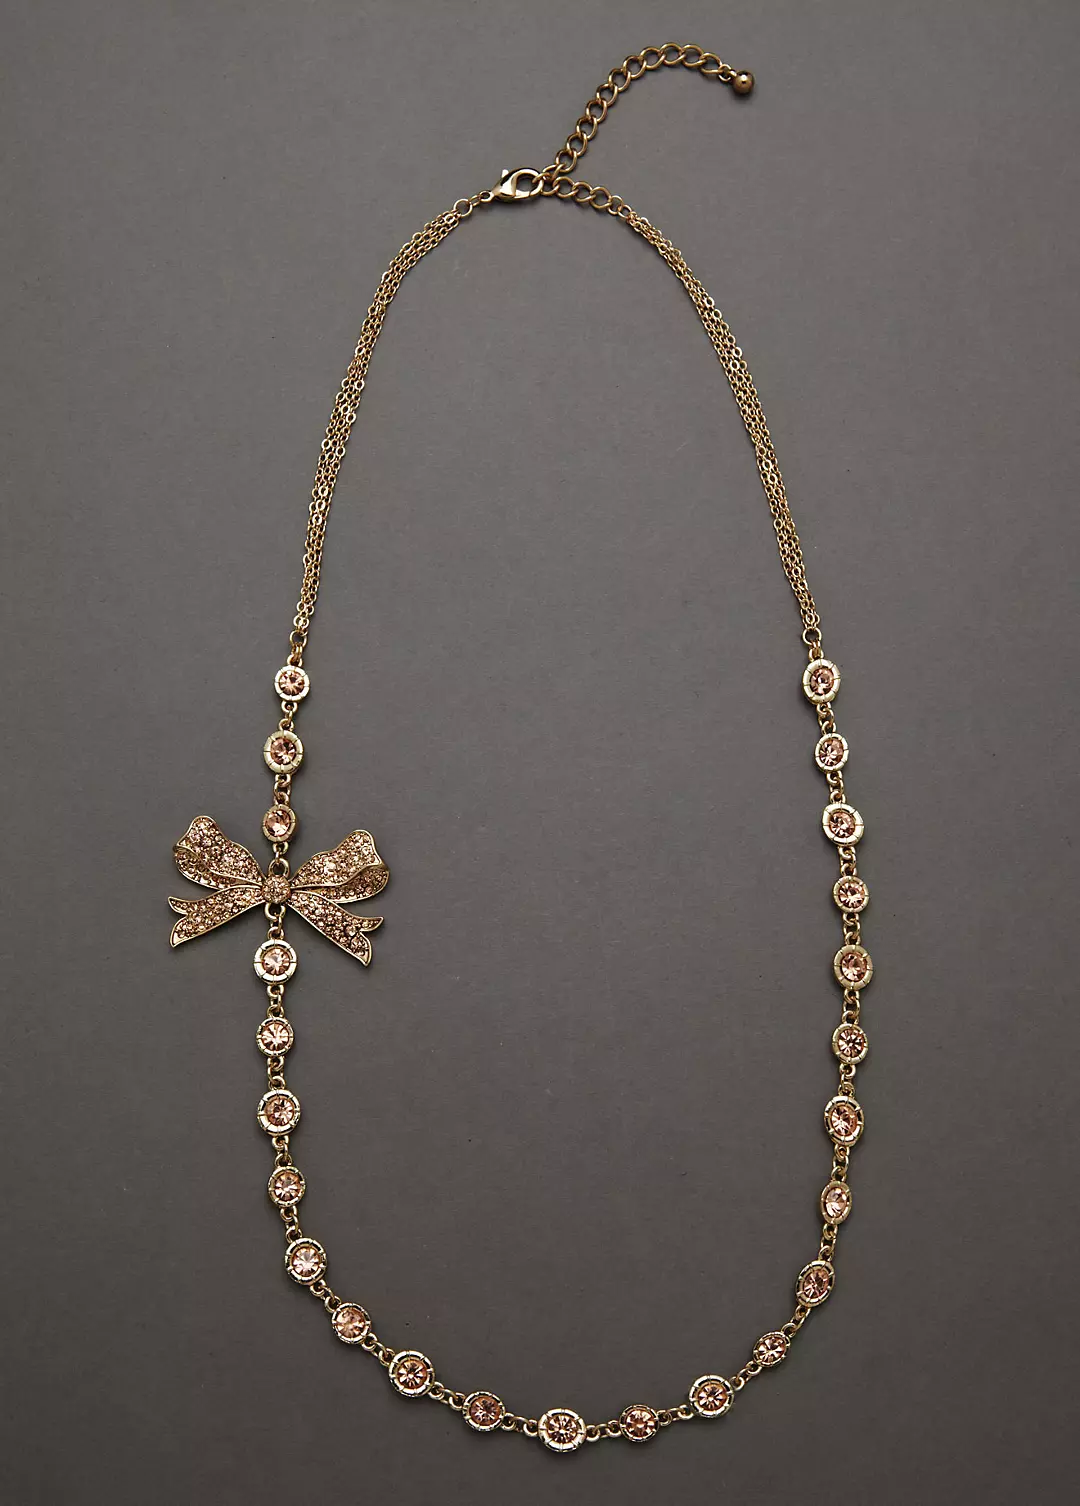 Gold Necklace with Colored Stone Detail and Bow Image